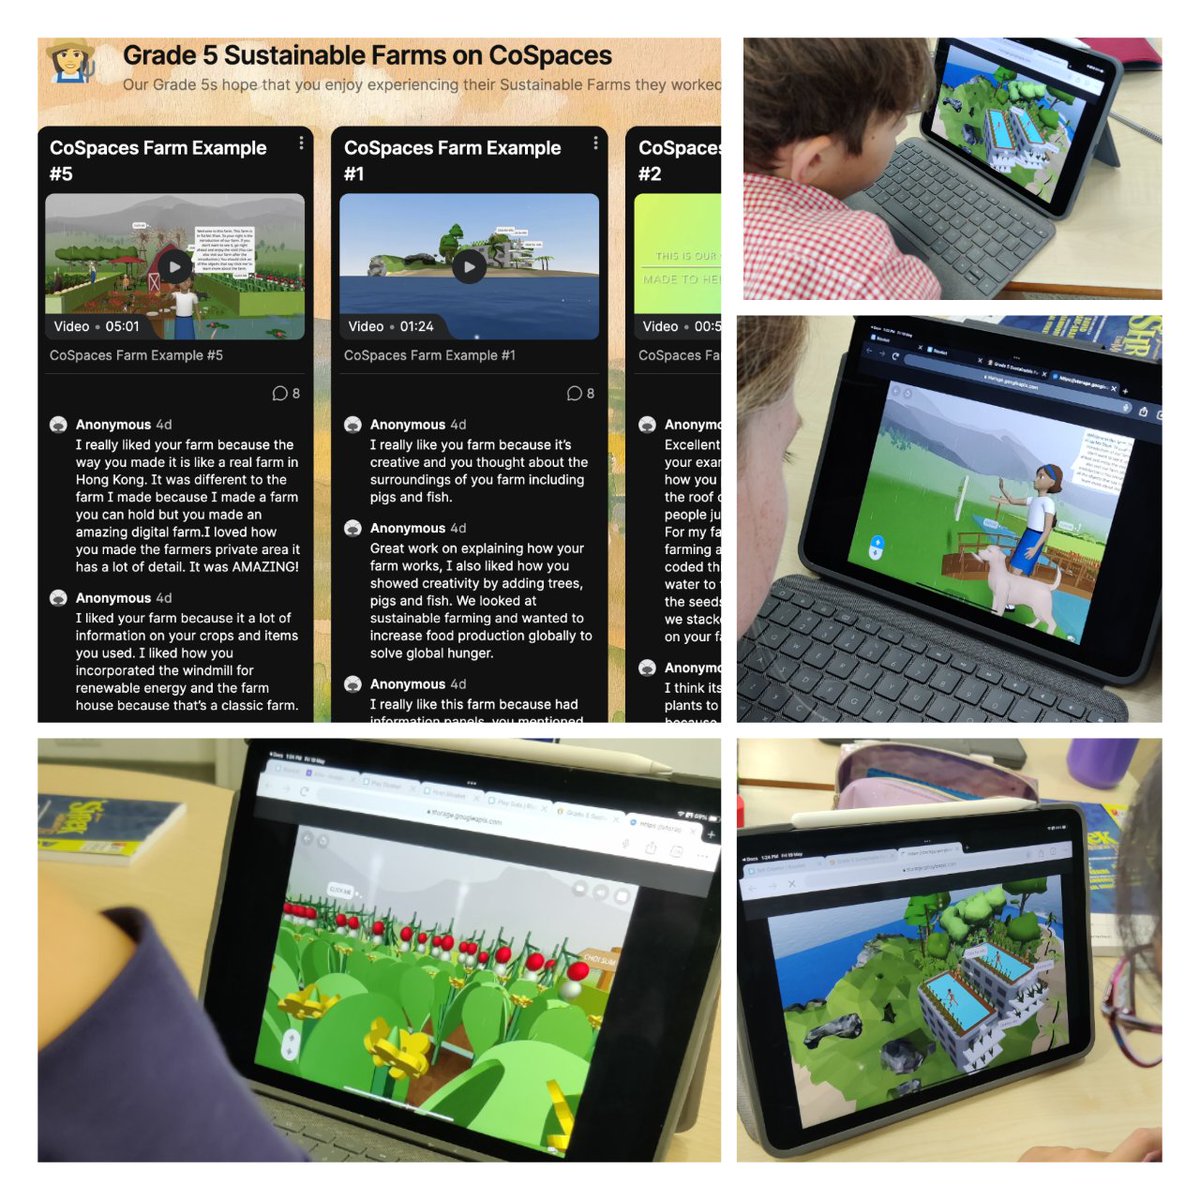 📢Huge shoutout to @mrkpyp! Exploring G5's awesome HK Sustainable Farms on @CoSpaces_Edu helped inspire & deepen my Y5's learning 🚜🌱 I'm so proud of the feedback, perspectives & understanding shared 👍
 
Collaboration across HK schools 🤝 

Padlet 👇 
isf.padlet.org/rmkrakofsky/gr…